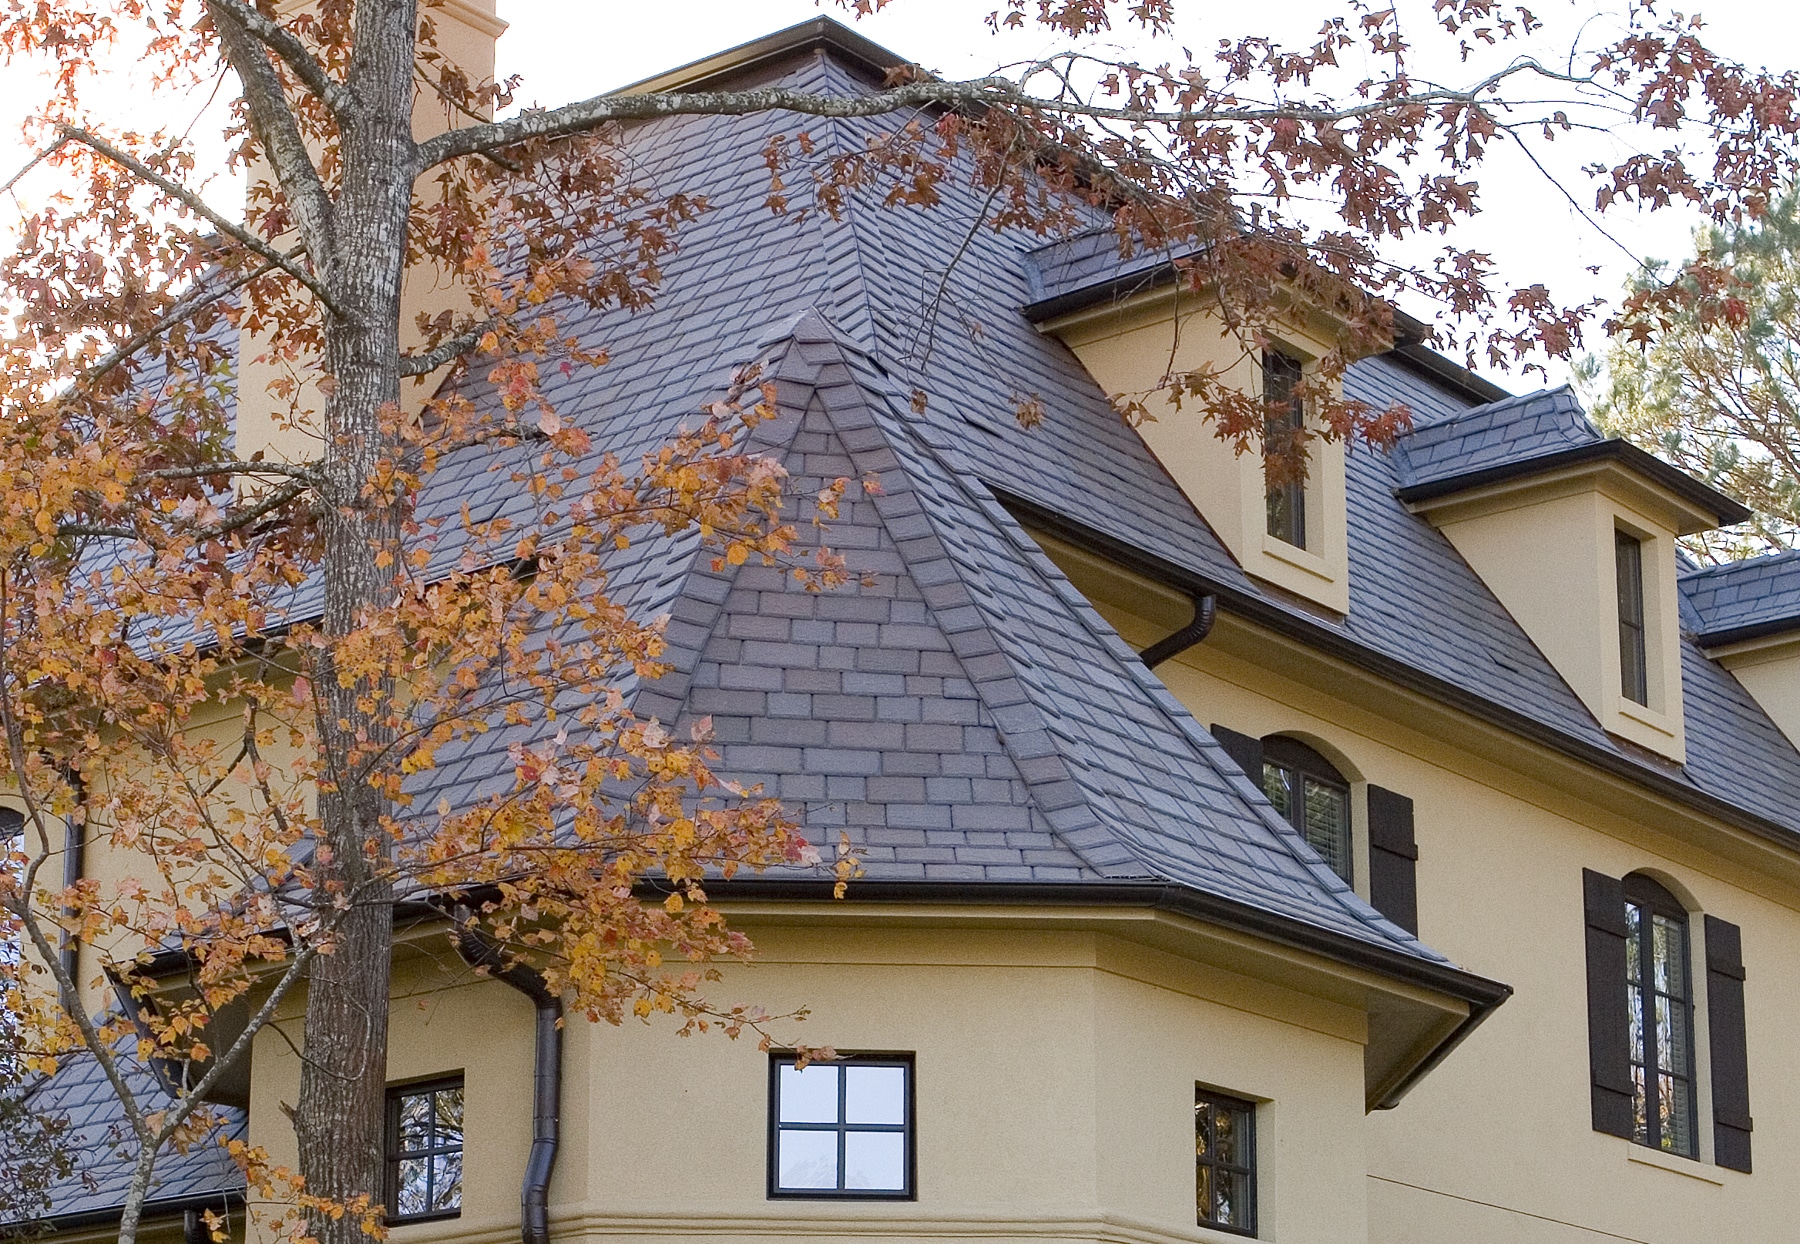 A house in the fall with a tan roof that may require roof replacement.